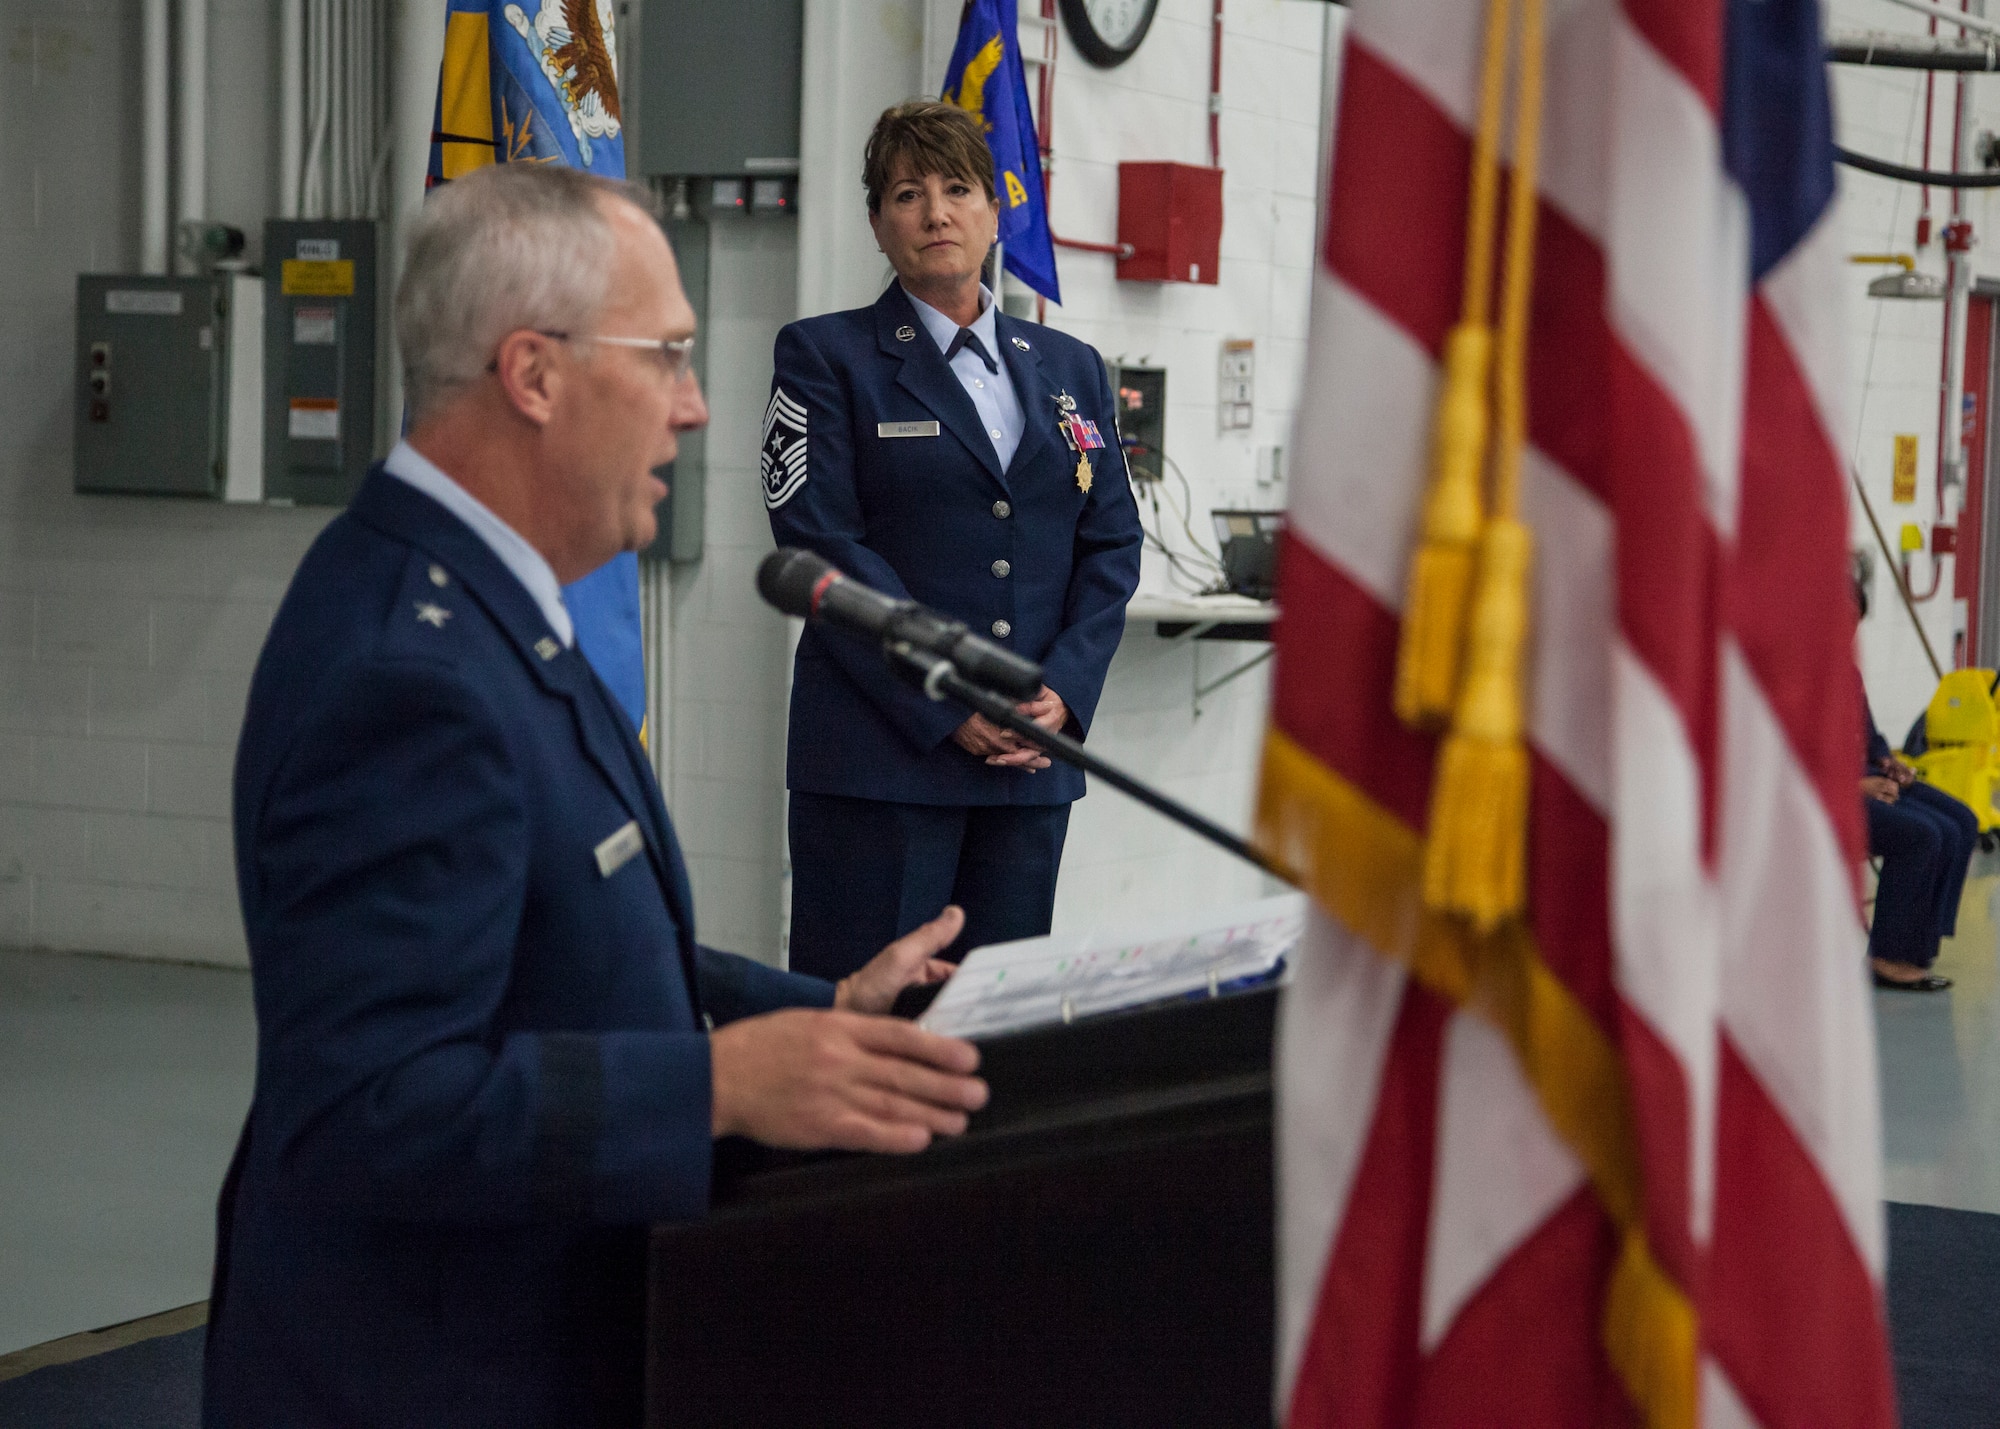 U.S. Air Force Brig. Gen. Gary Ebben speaks after presenting Command Chief Master Sgt. Connie Back with the Legion of Merit Award during a change of authority ceremony at the 128th Air Refueling Wing, Wisconsin Air National Guard, Oct. 14, 2017.